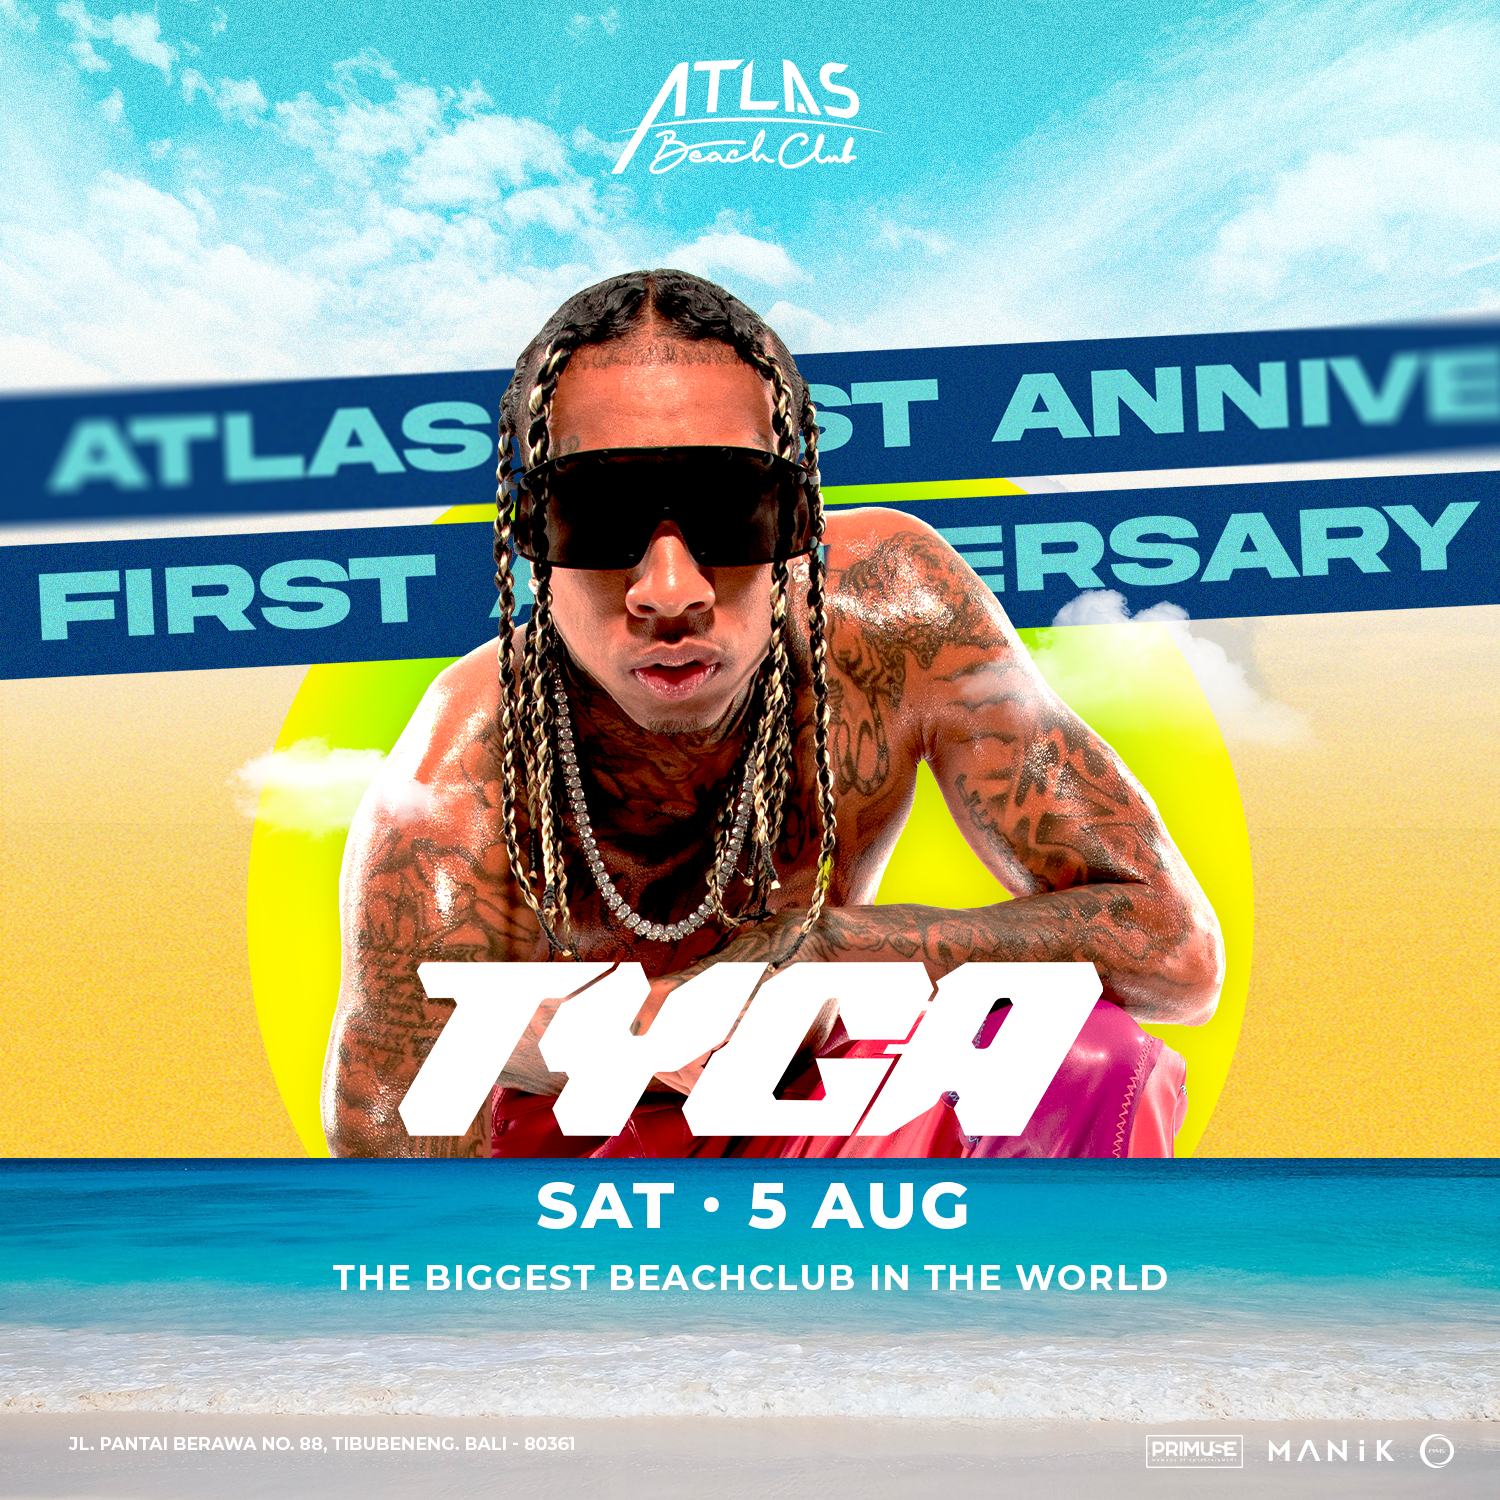 HW Group welcomes Tyga as the star performer for Atlas Beach Club’s 1st anniversary